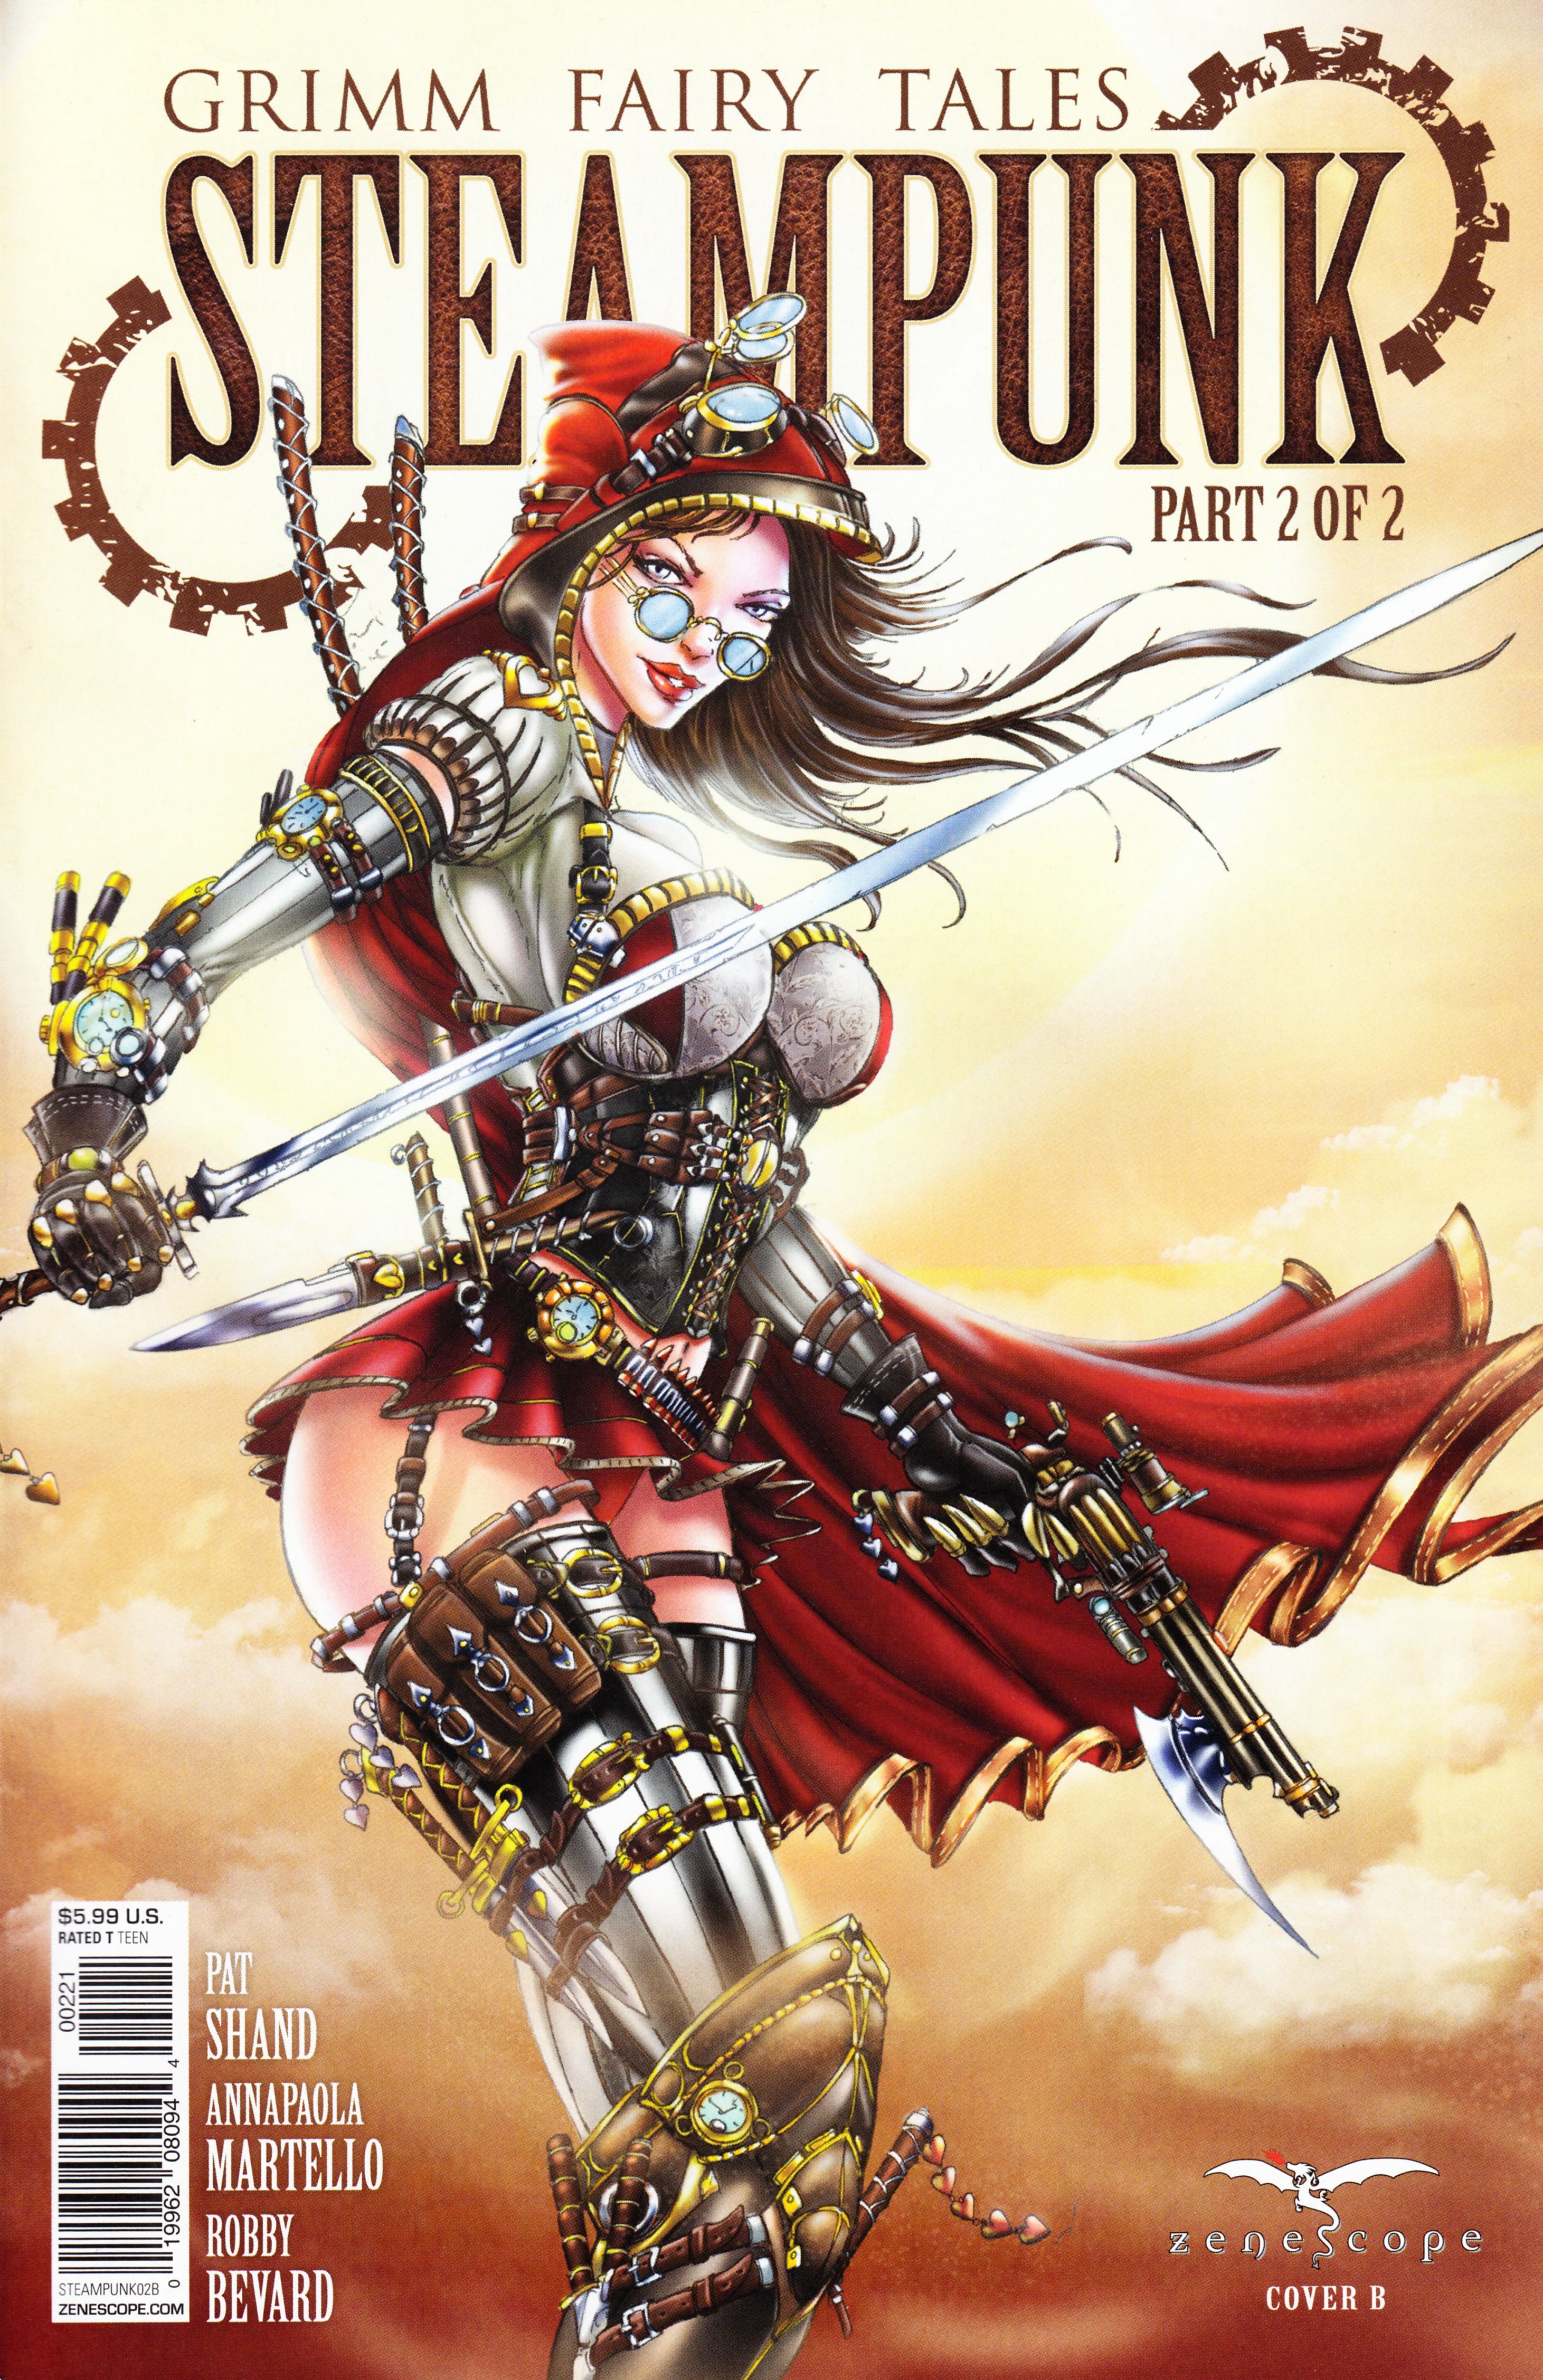 Read online Grimm Fairy Tales Steampunk comic -  Issue #2 - 1